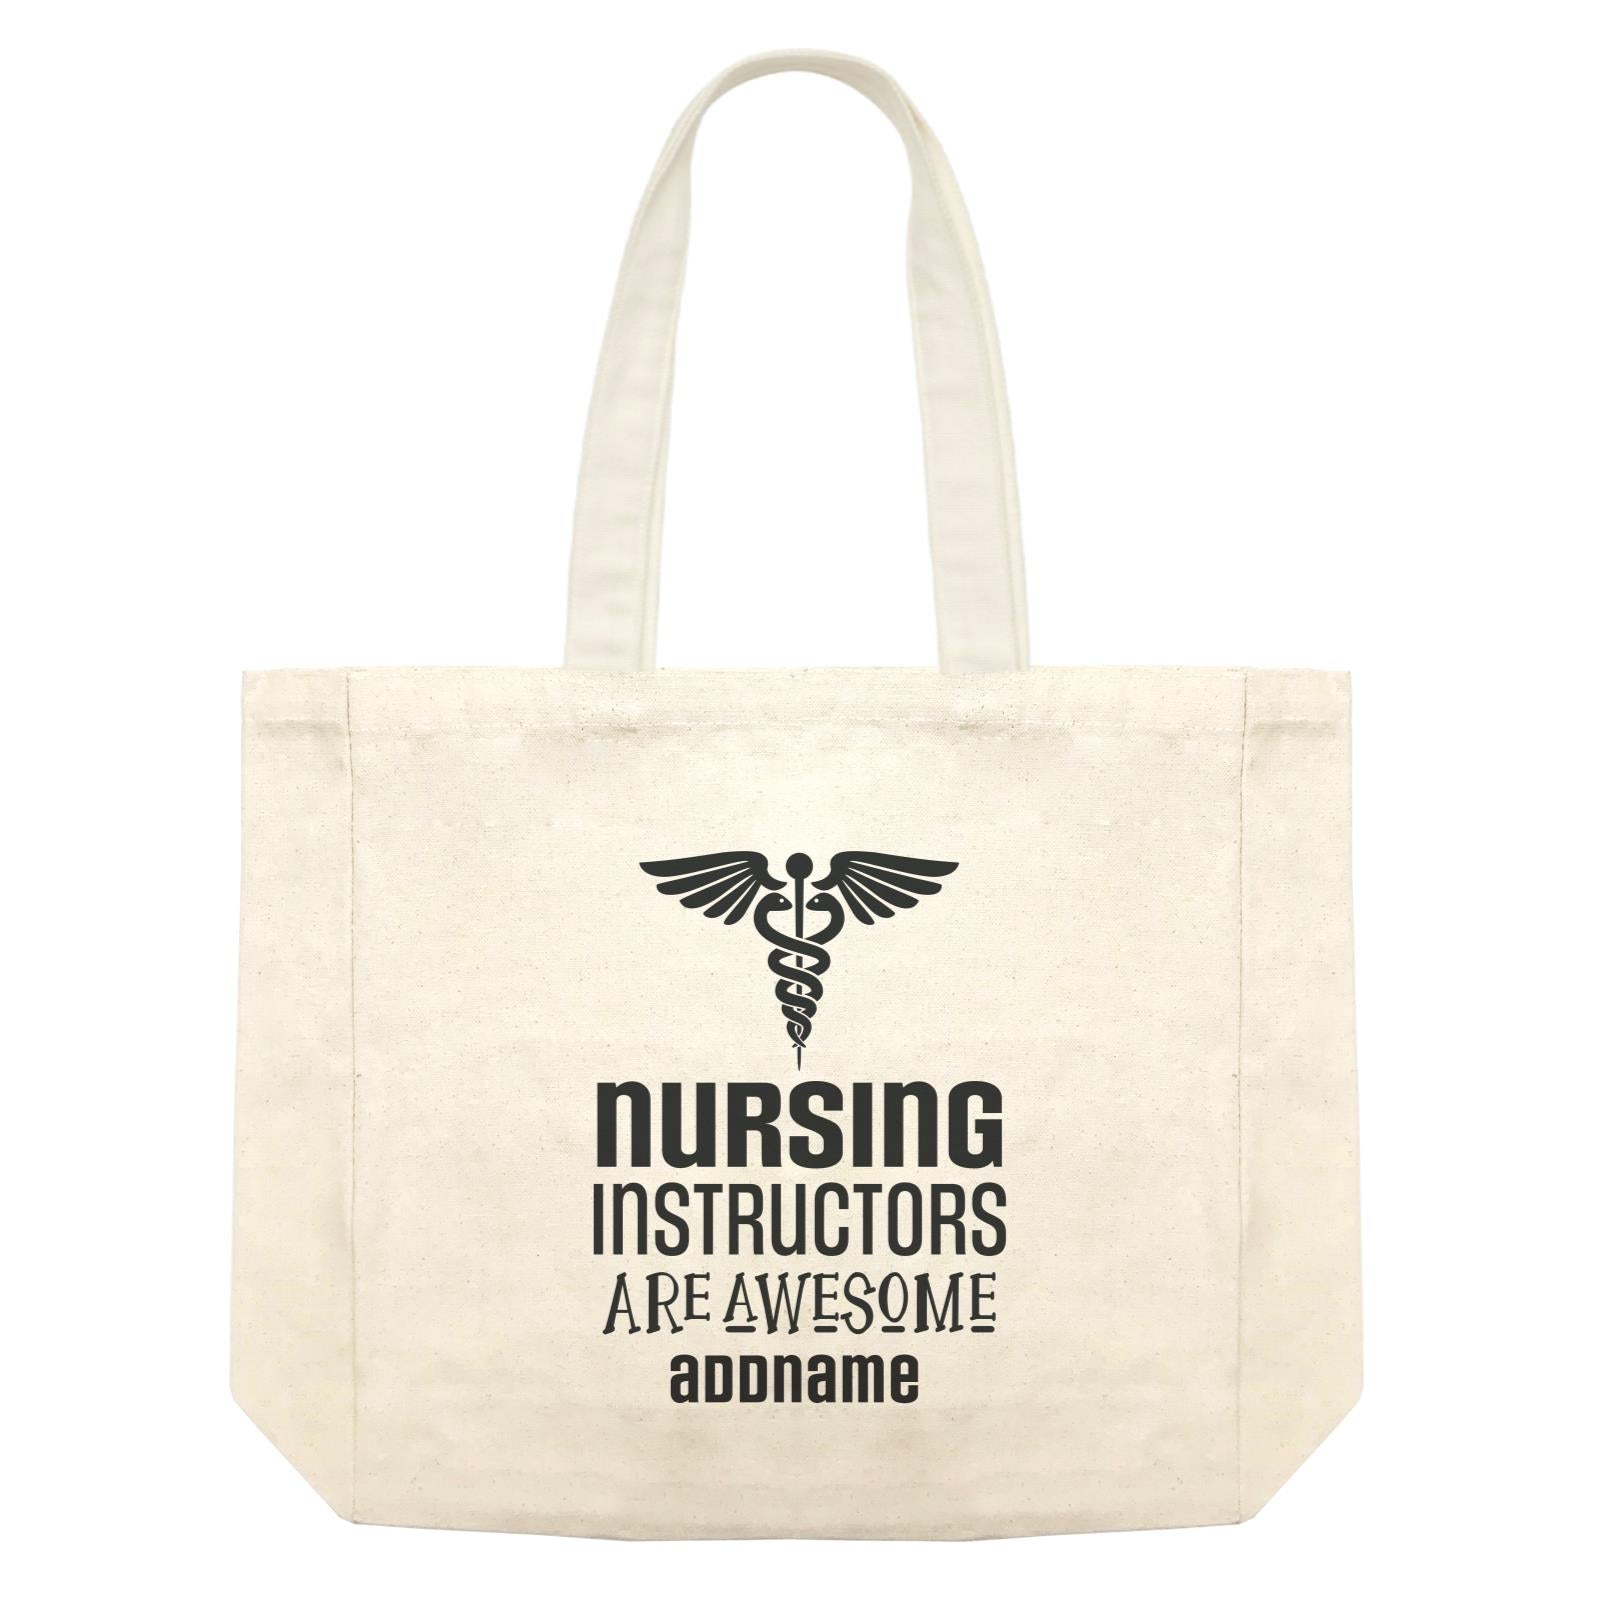 Nurse Quotes Nursing Instructors Are Awesome Addname Shopping Bag